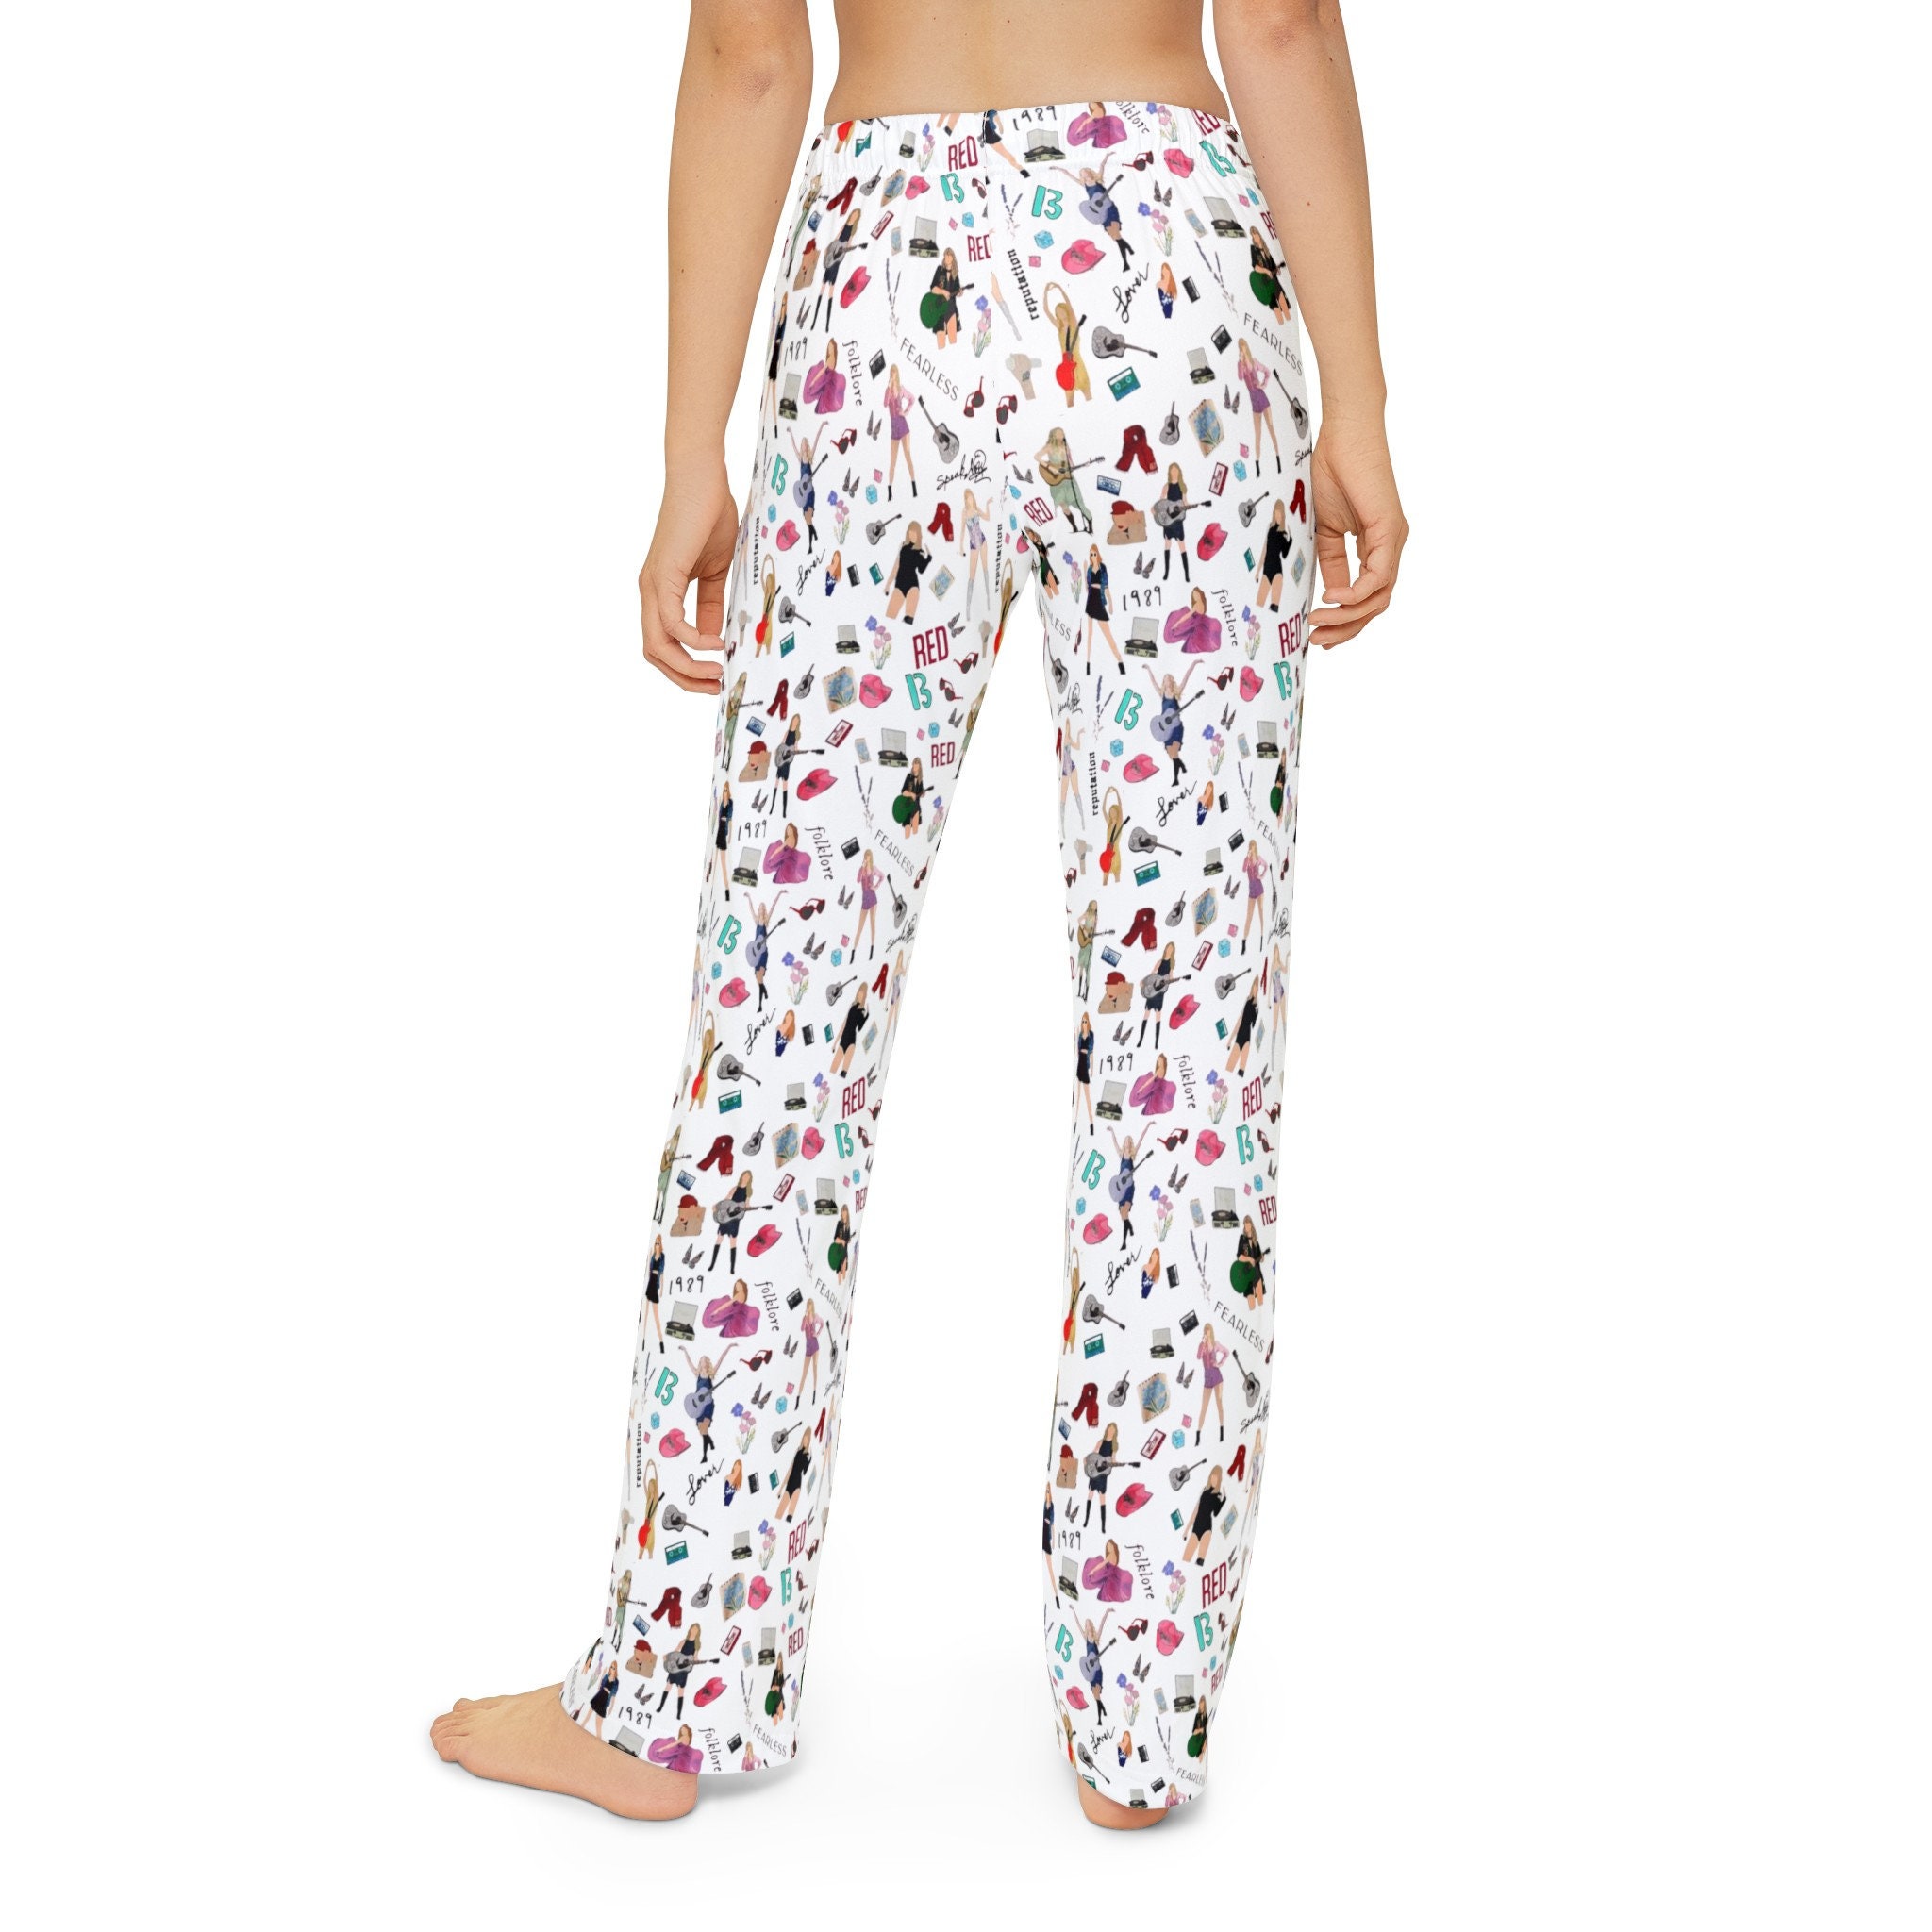 Taylor Pajama Pants, Taylor Merch, Gift For Mother's day